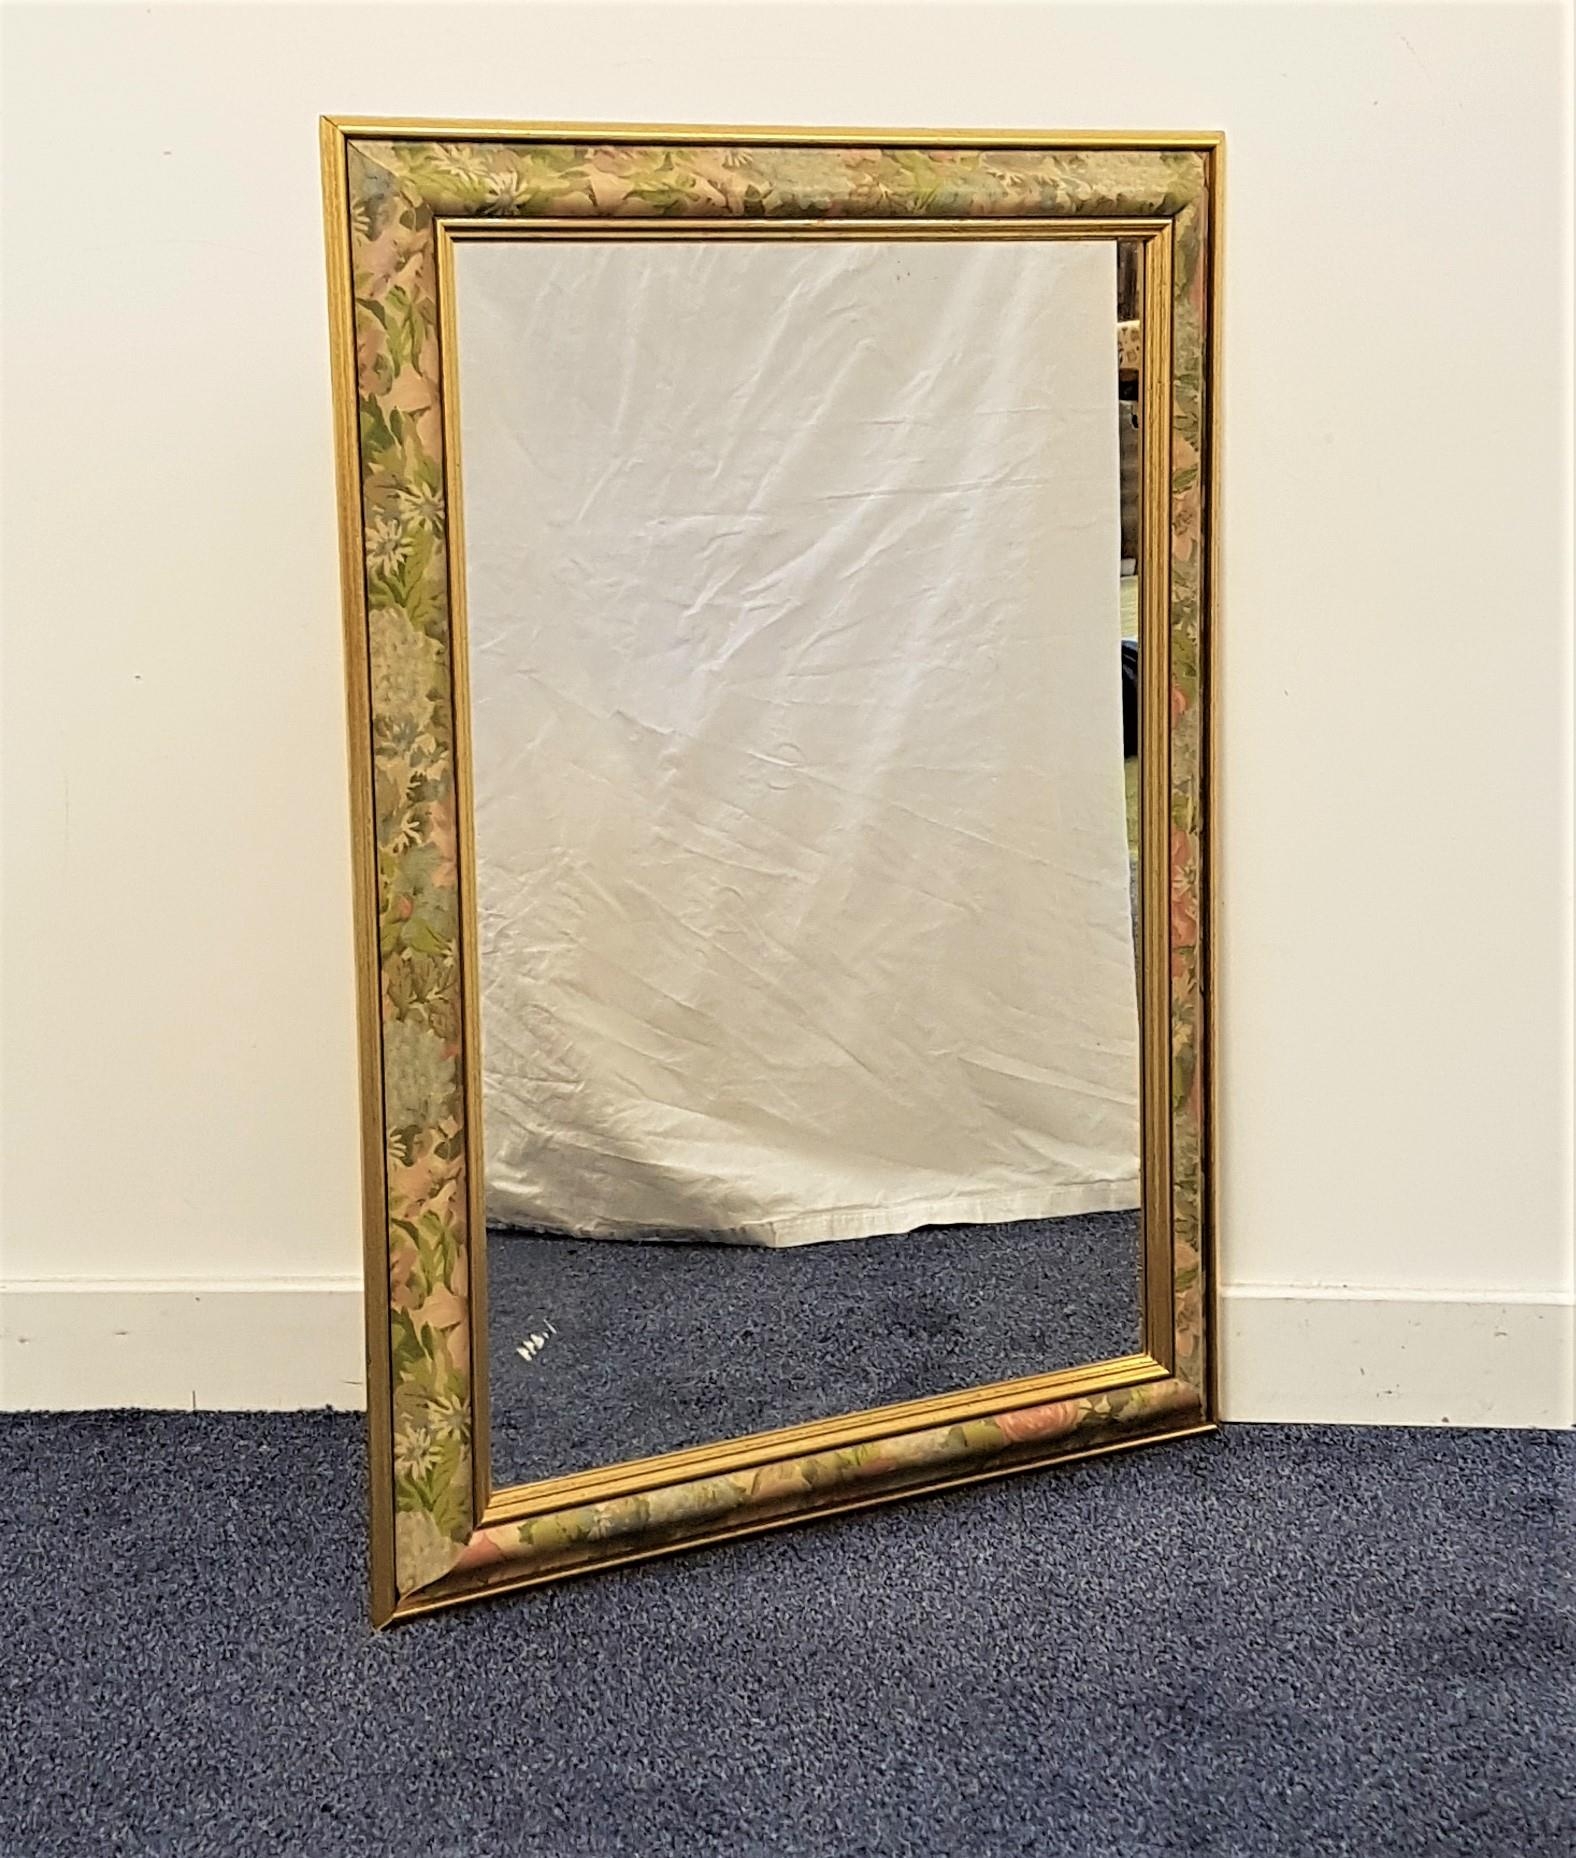 RECTANGULAR WALL MIRROR in a cushion frame decorated with flowers, with a plain plate, 89cm x 63.5cm